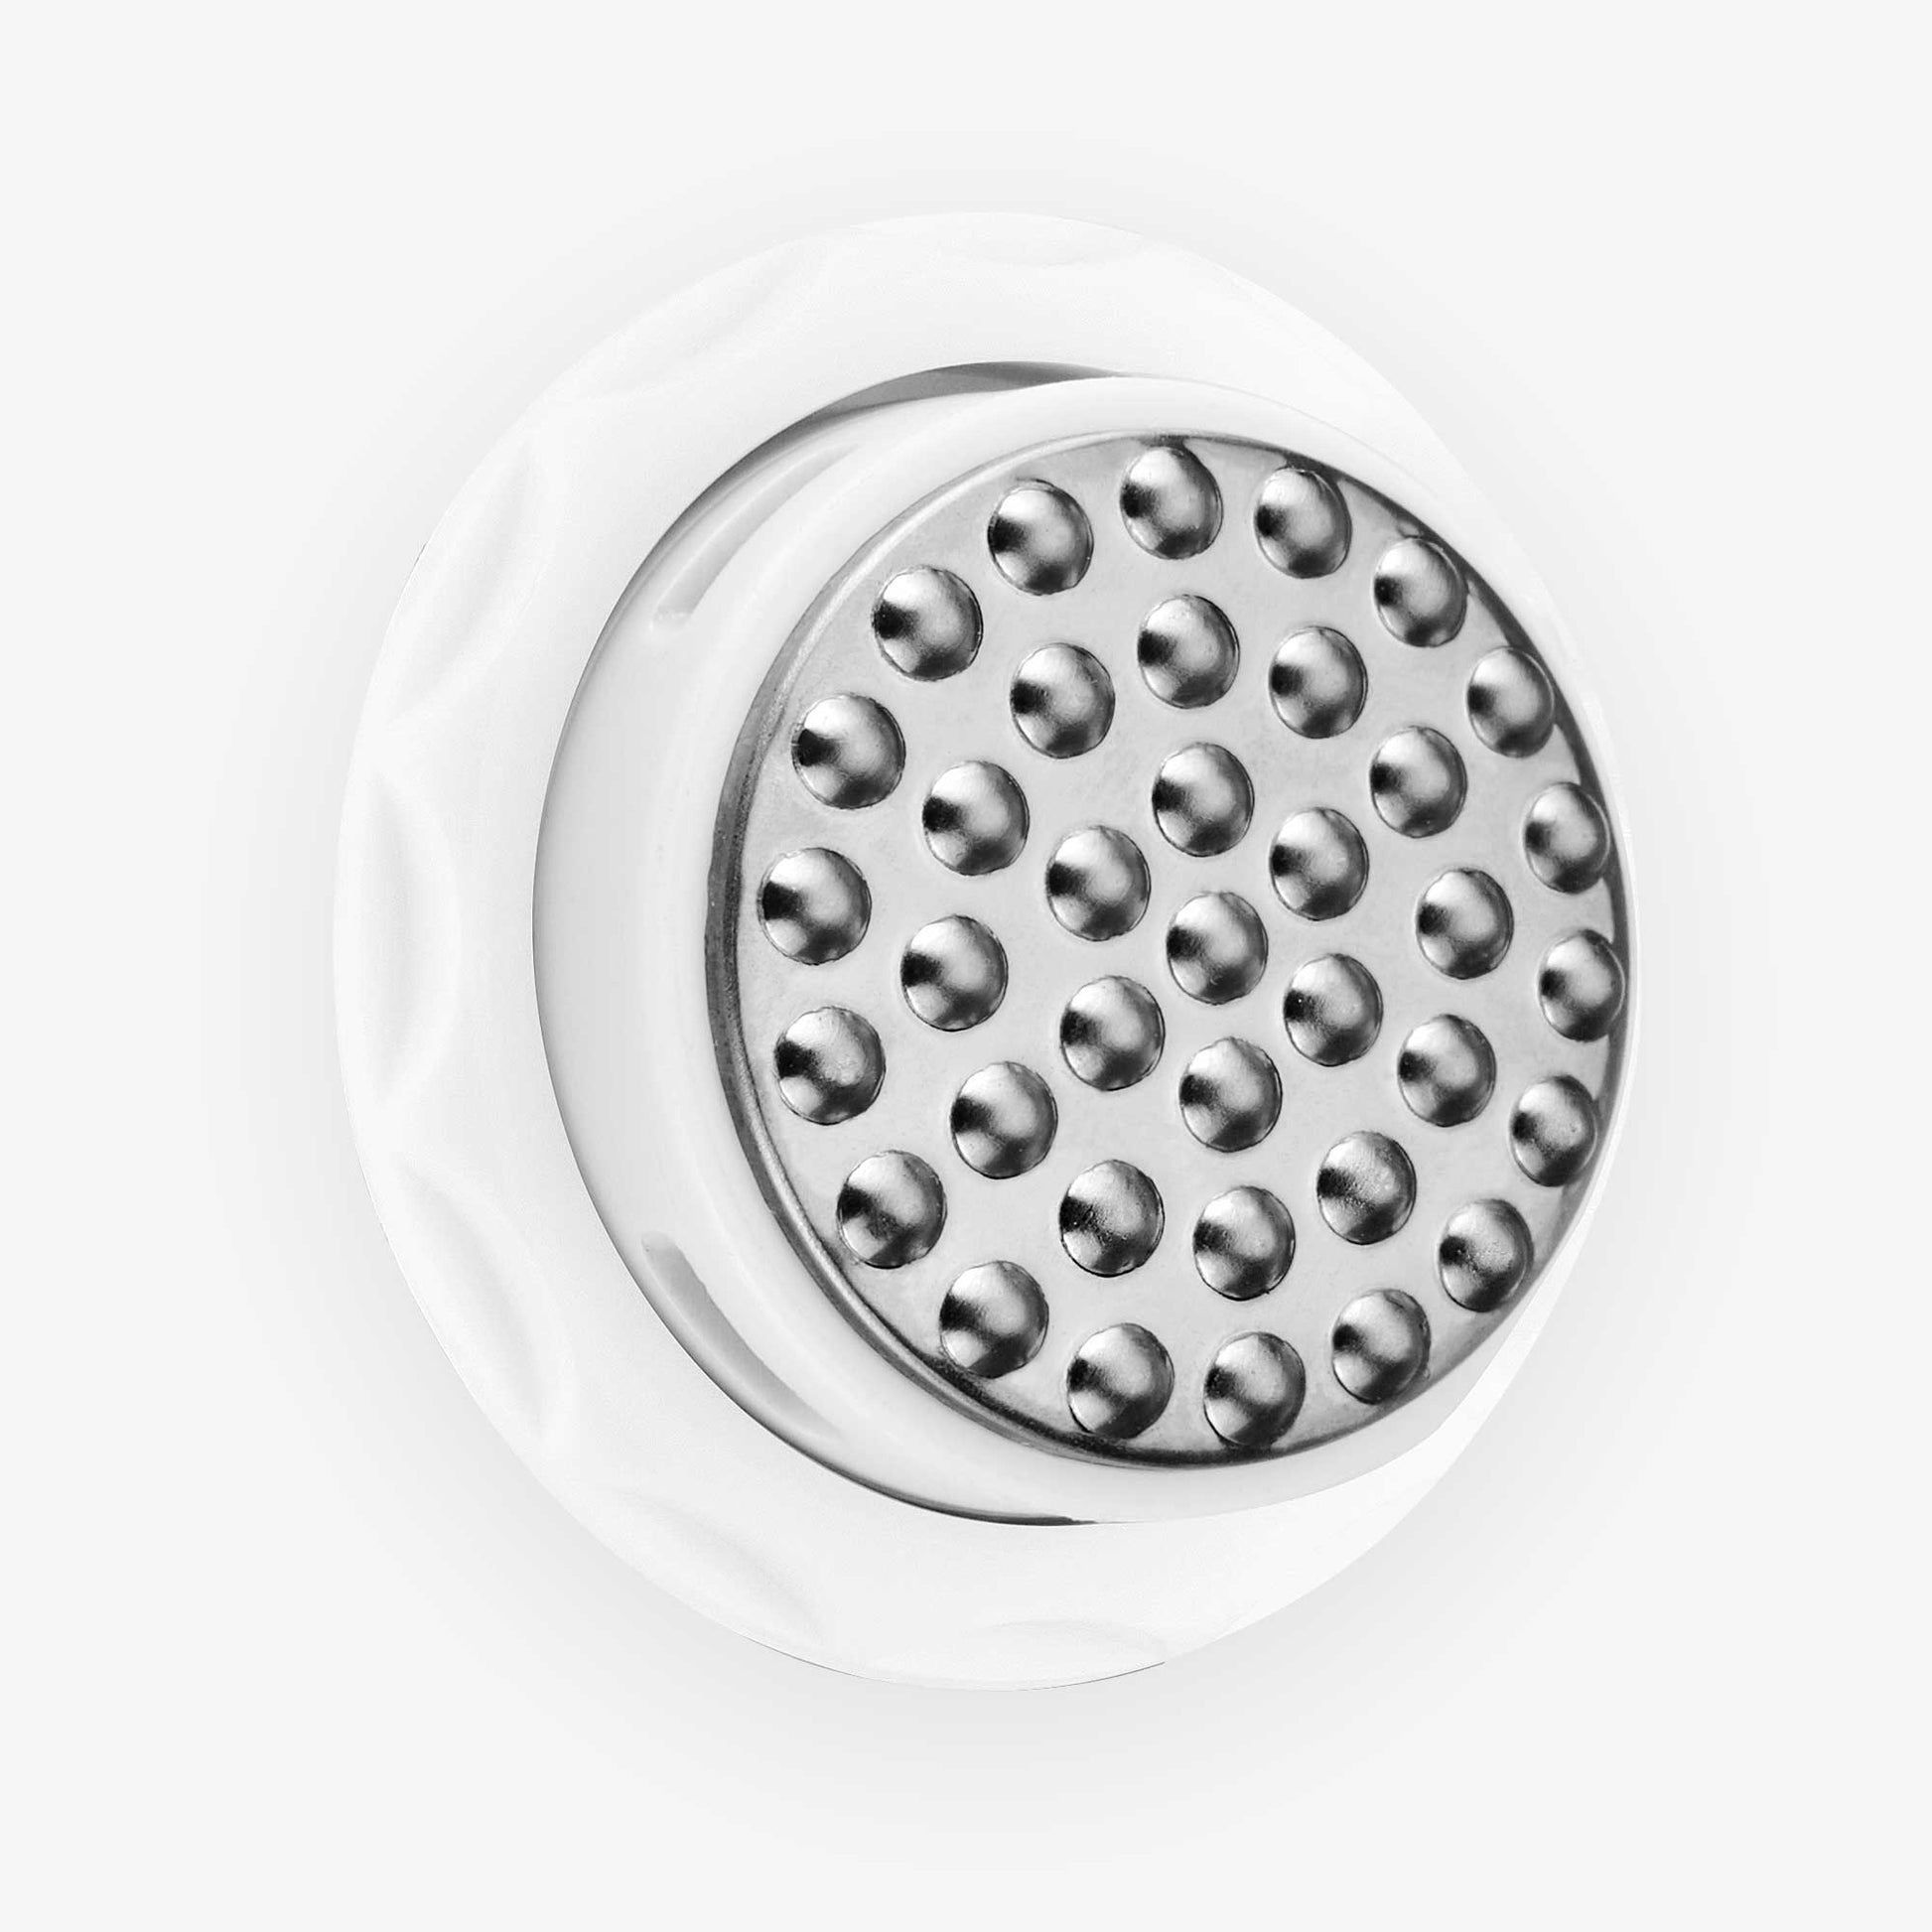 A white NOVA Serum Infusion Head shower head with metal balls for a modern look and feel by Spa Sciences.